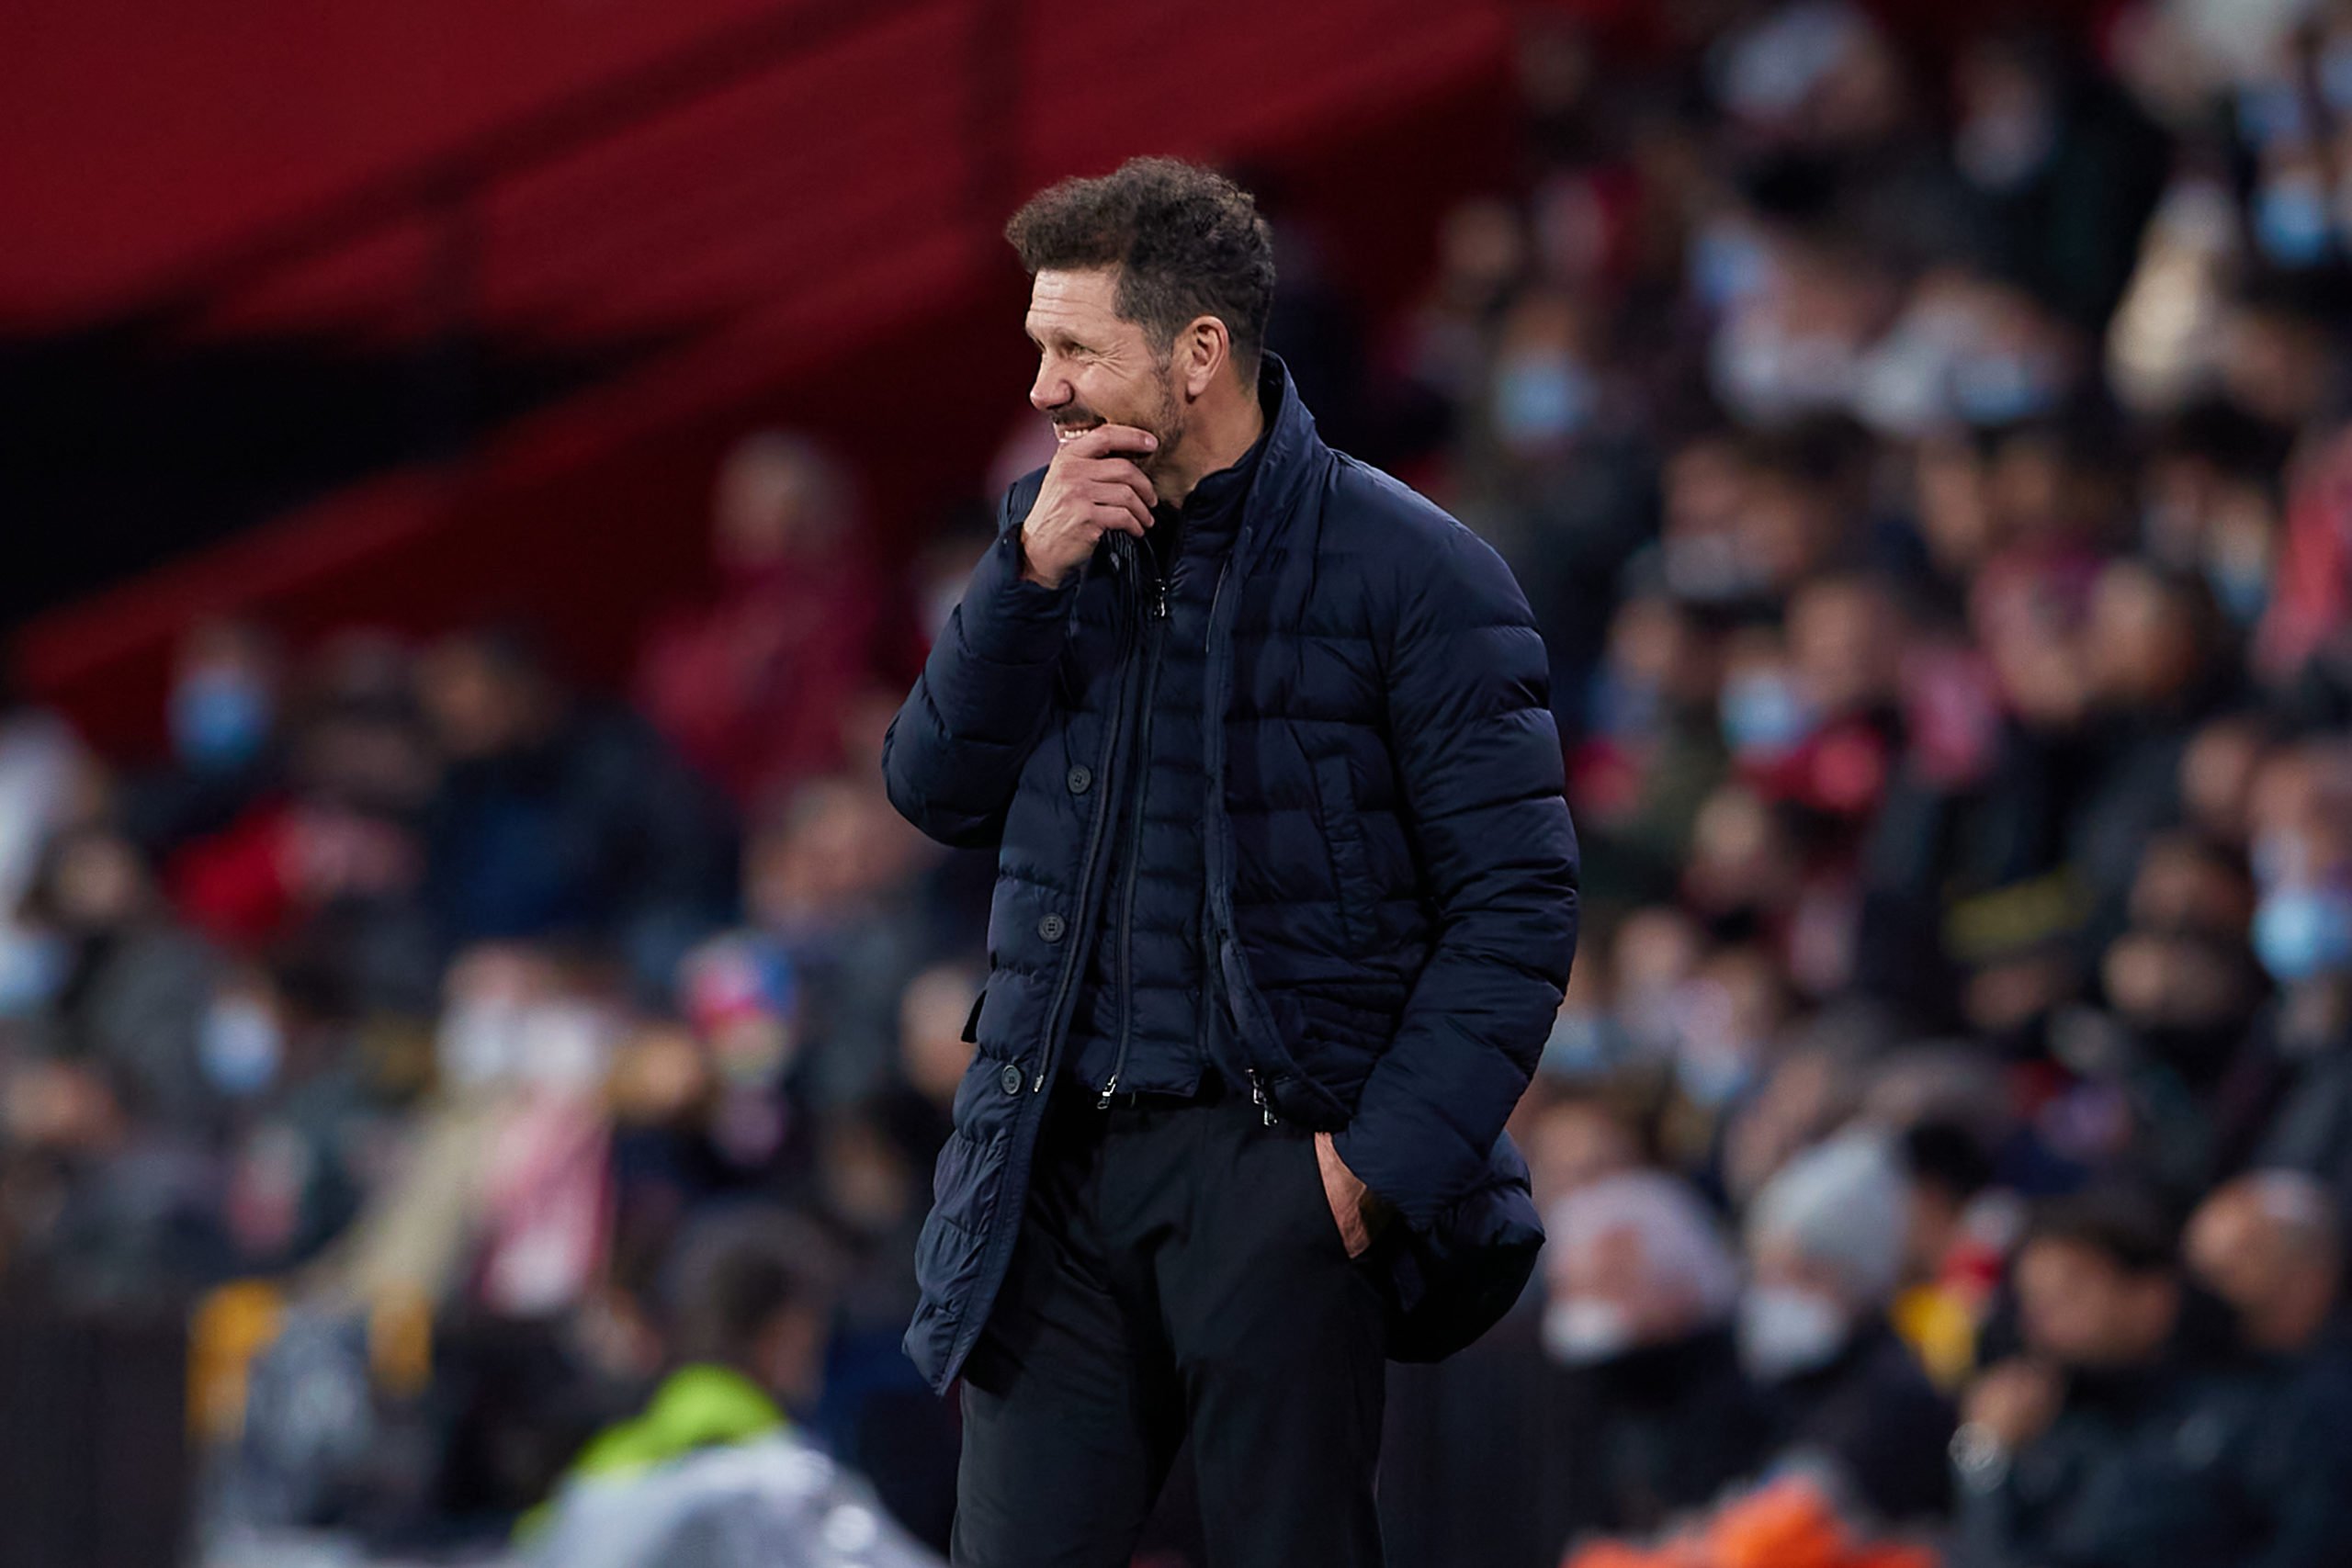 Report: Diego Simeone wants £150k-a-week Chelsea player at Atletico now, Blues may sell this month